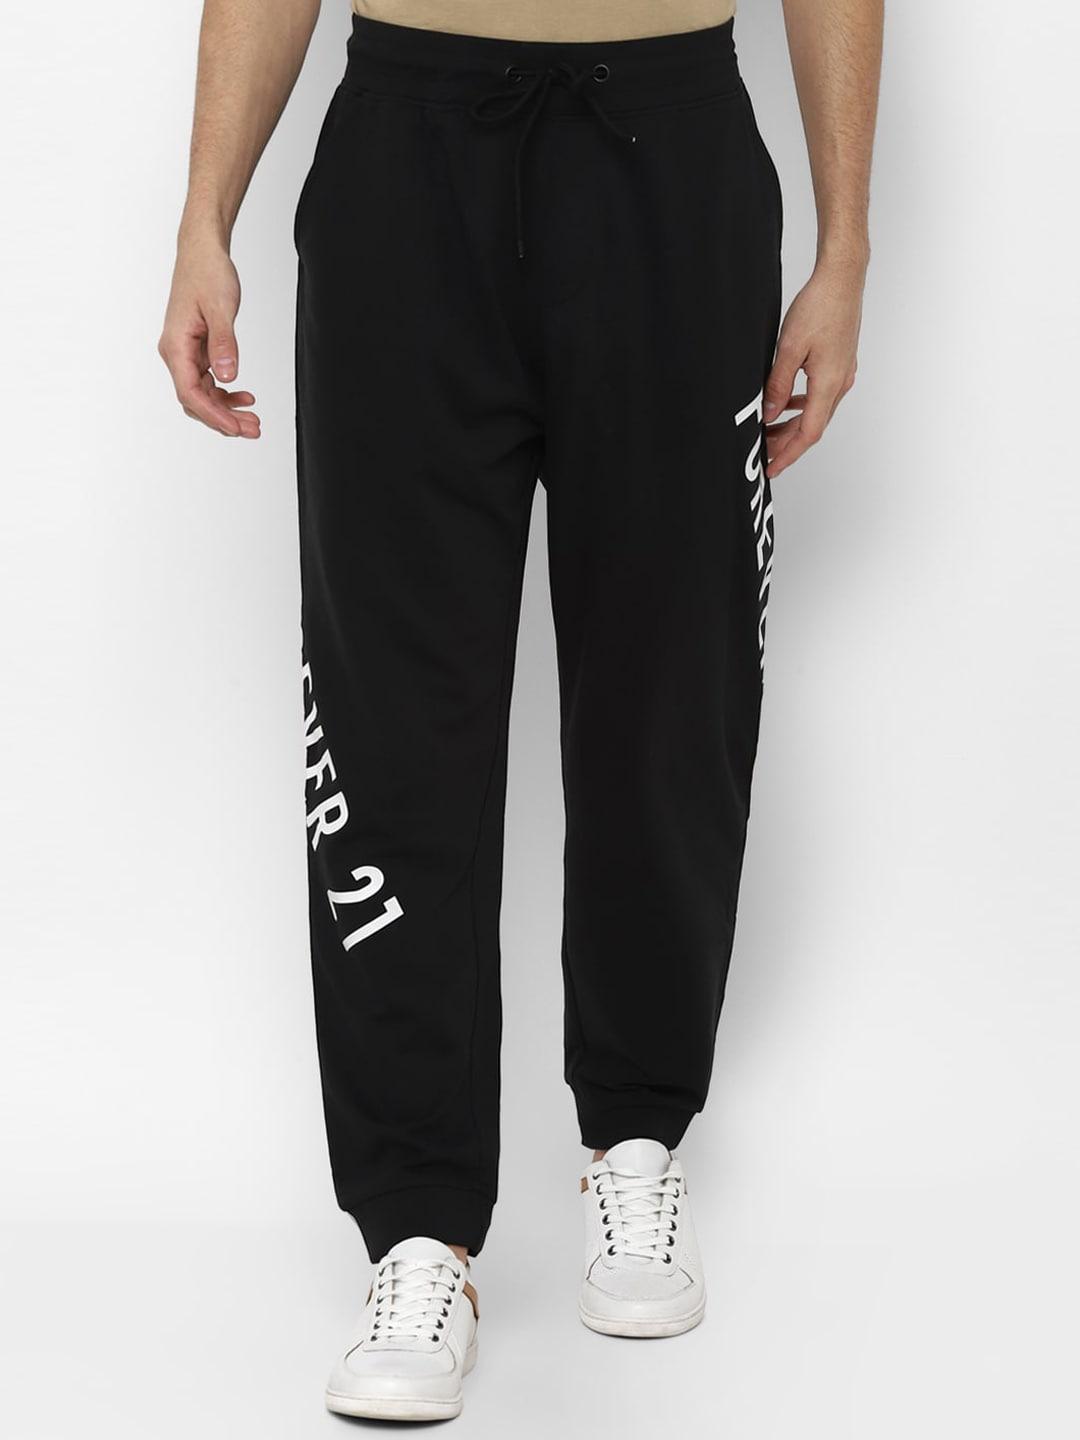 forever-21-men-black-printed-joggers-trousers